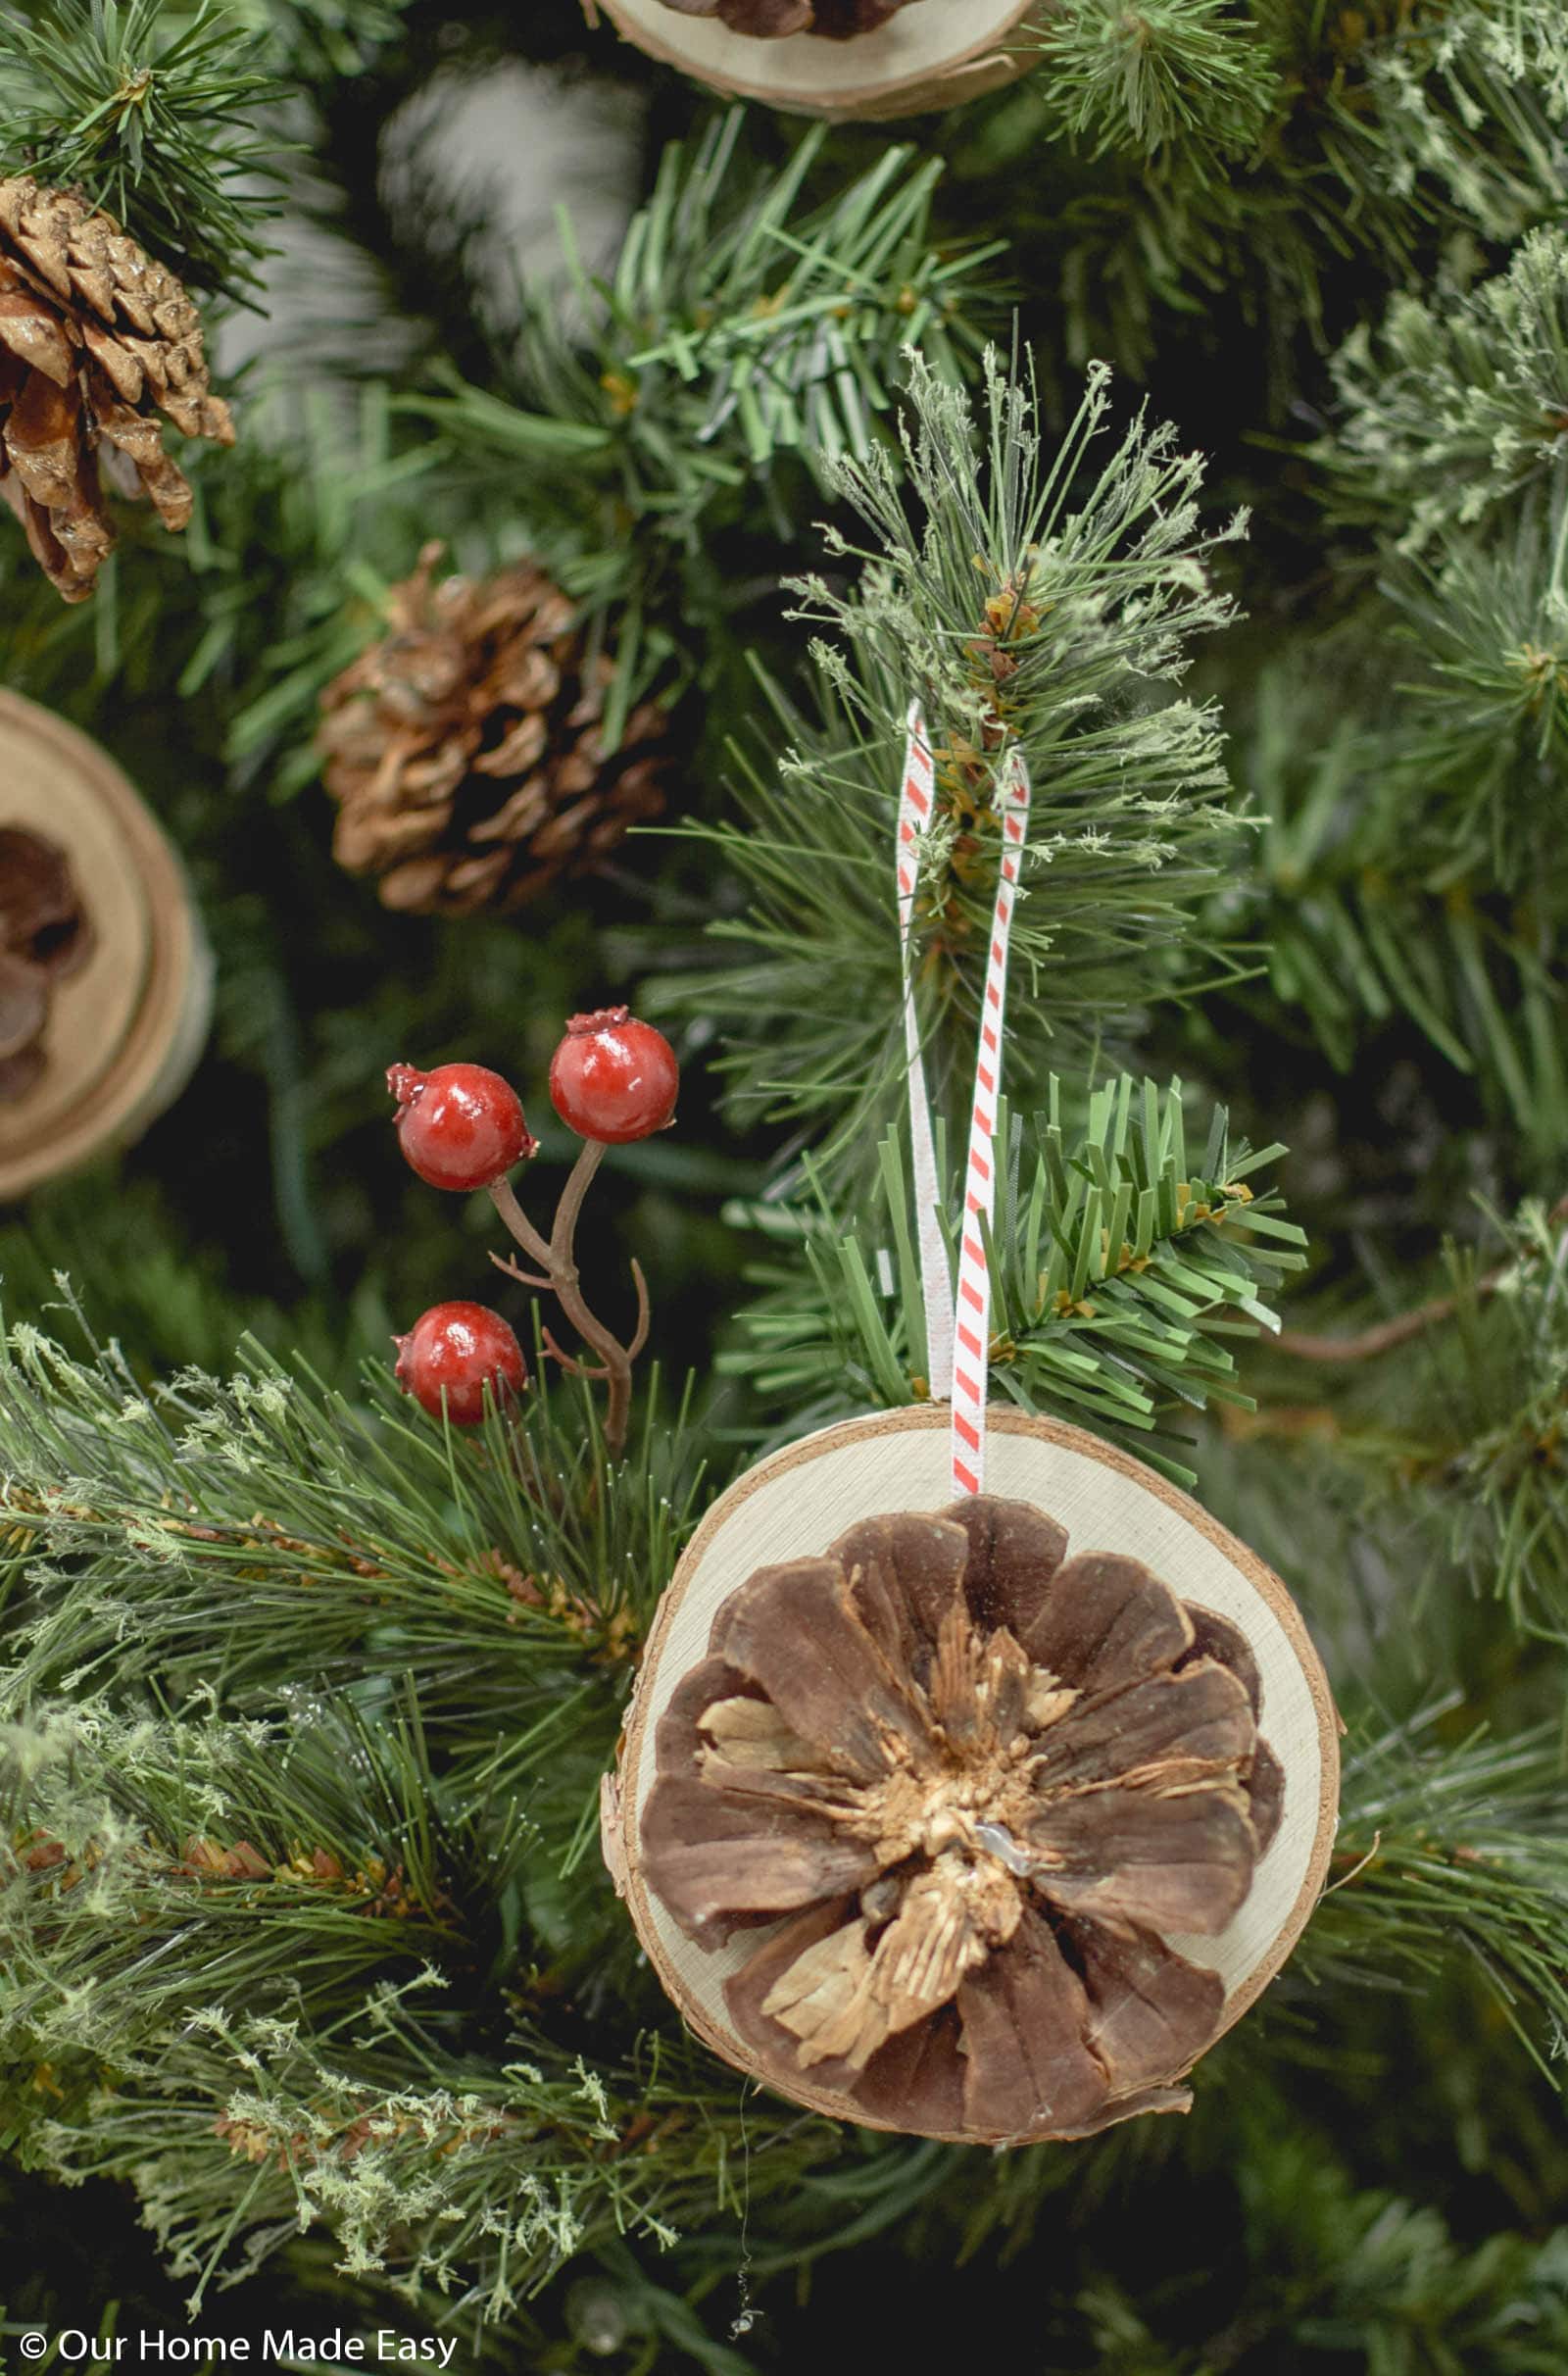 These easy wood slice ornaments are made with pine cones you can collect in your own backyard